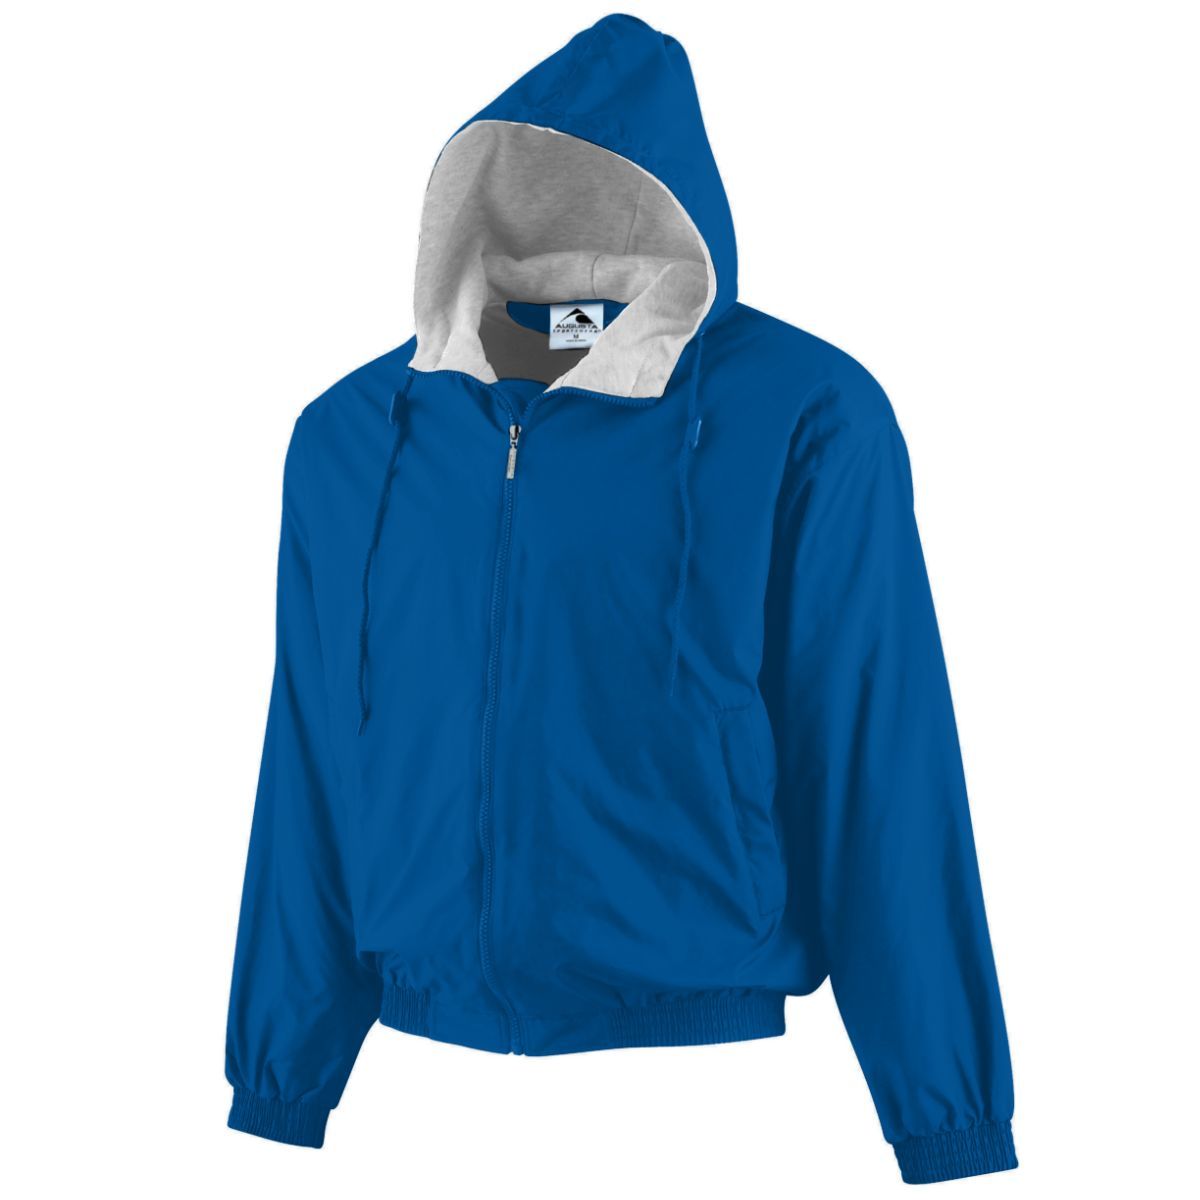 Augusta Sportswear Hooded Taffeta Jacket/Fleece Lined in Royal  -Part of the Adult, Adult-Jacket, Augusta-Products, Outerwear product lines at KanaleyCreations.com